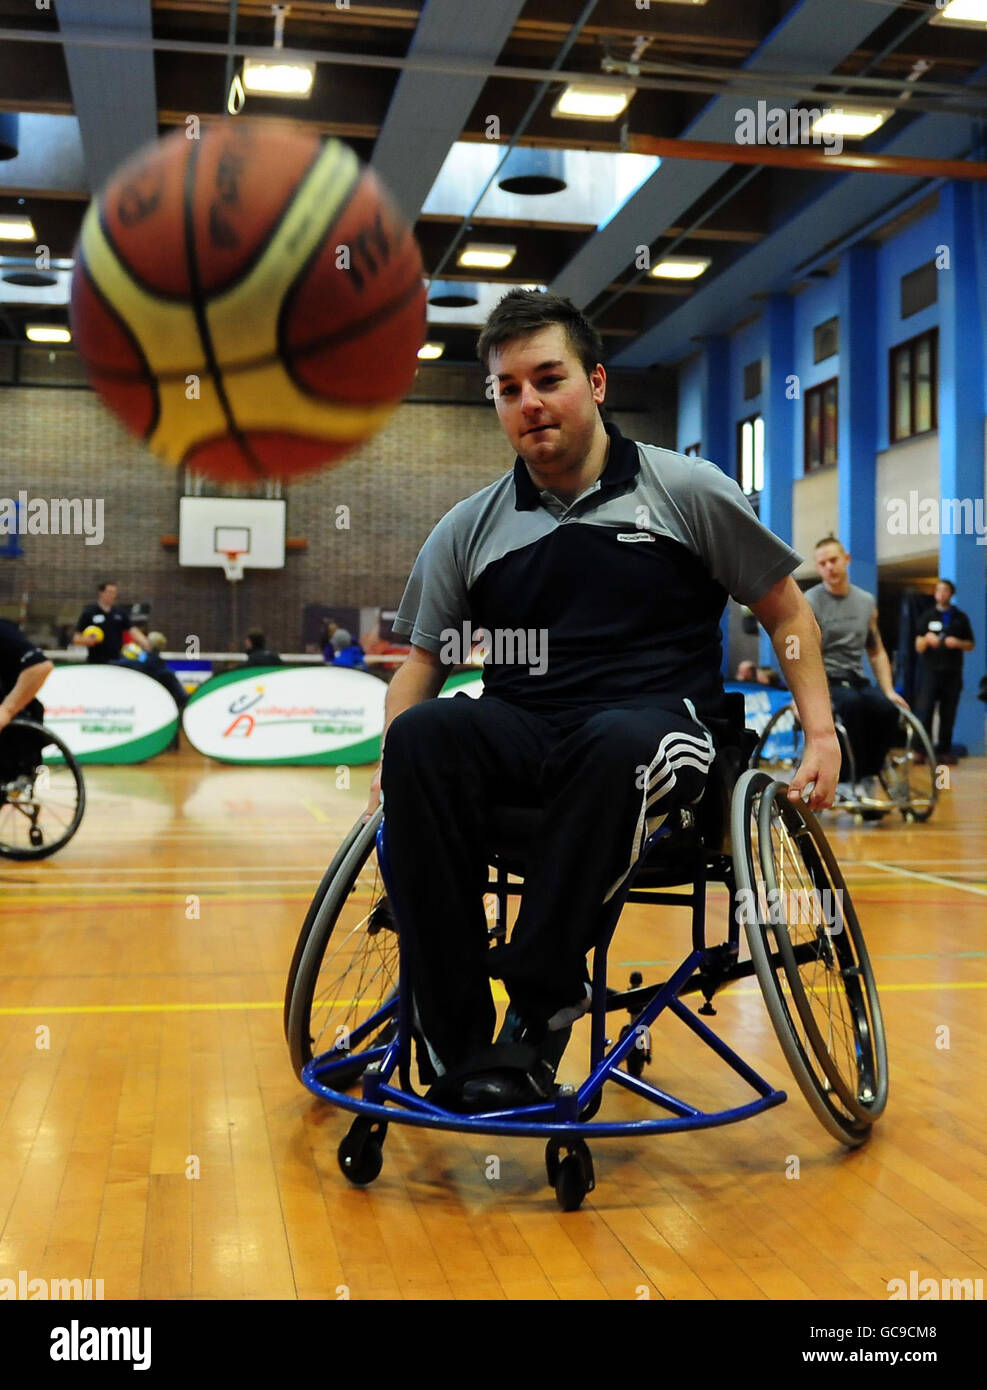 Press Association Journalist Alex Brooker takes part in the Basketball event of the ParalympicsGB London 2012 talent assessment day at the Munrow Sports Centre at the University of Birmingham. Stock Photo